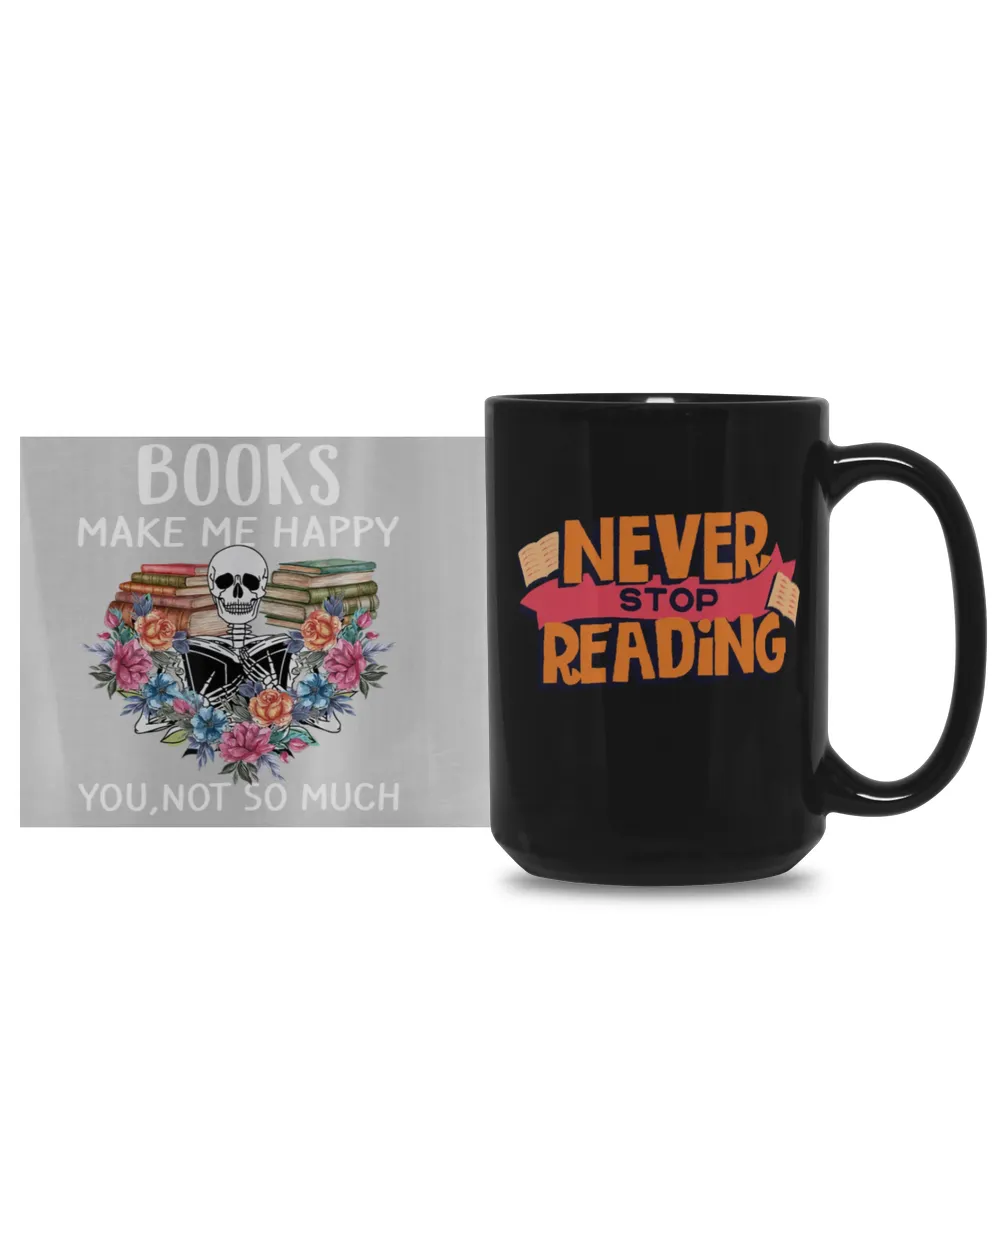 BOOKS MAKE ME HAPPY YOU NOT SO MUCH Book lovers mugs